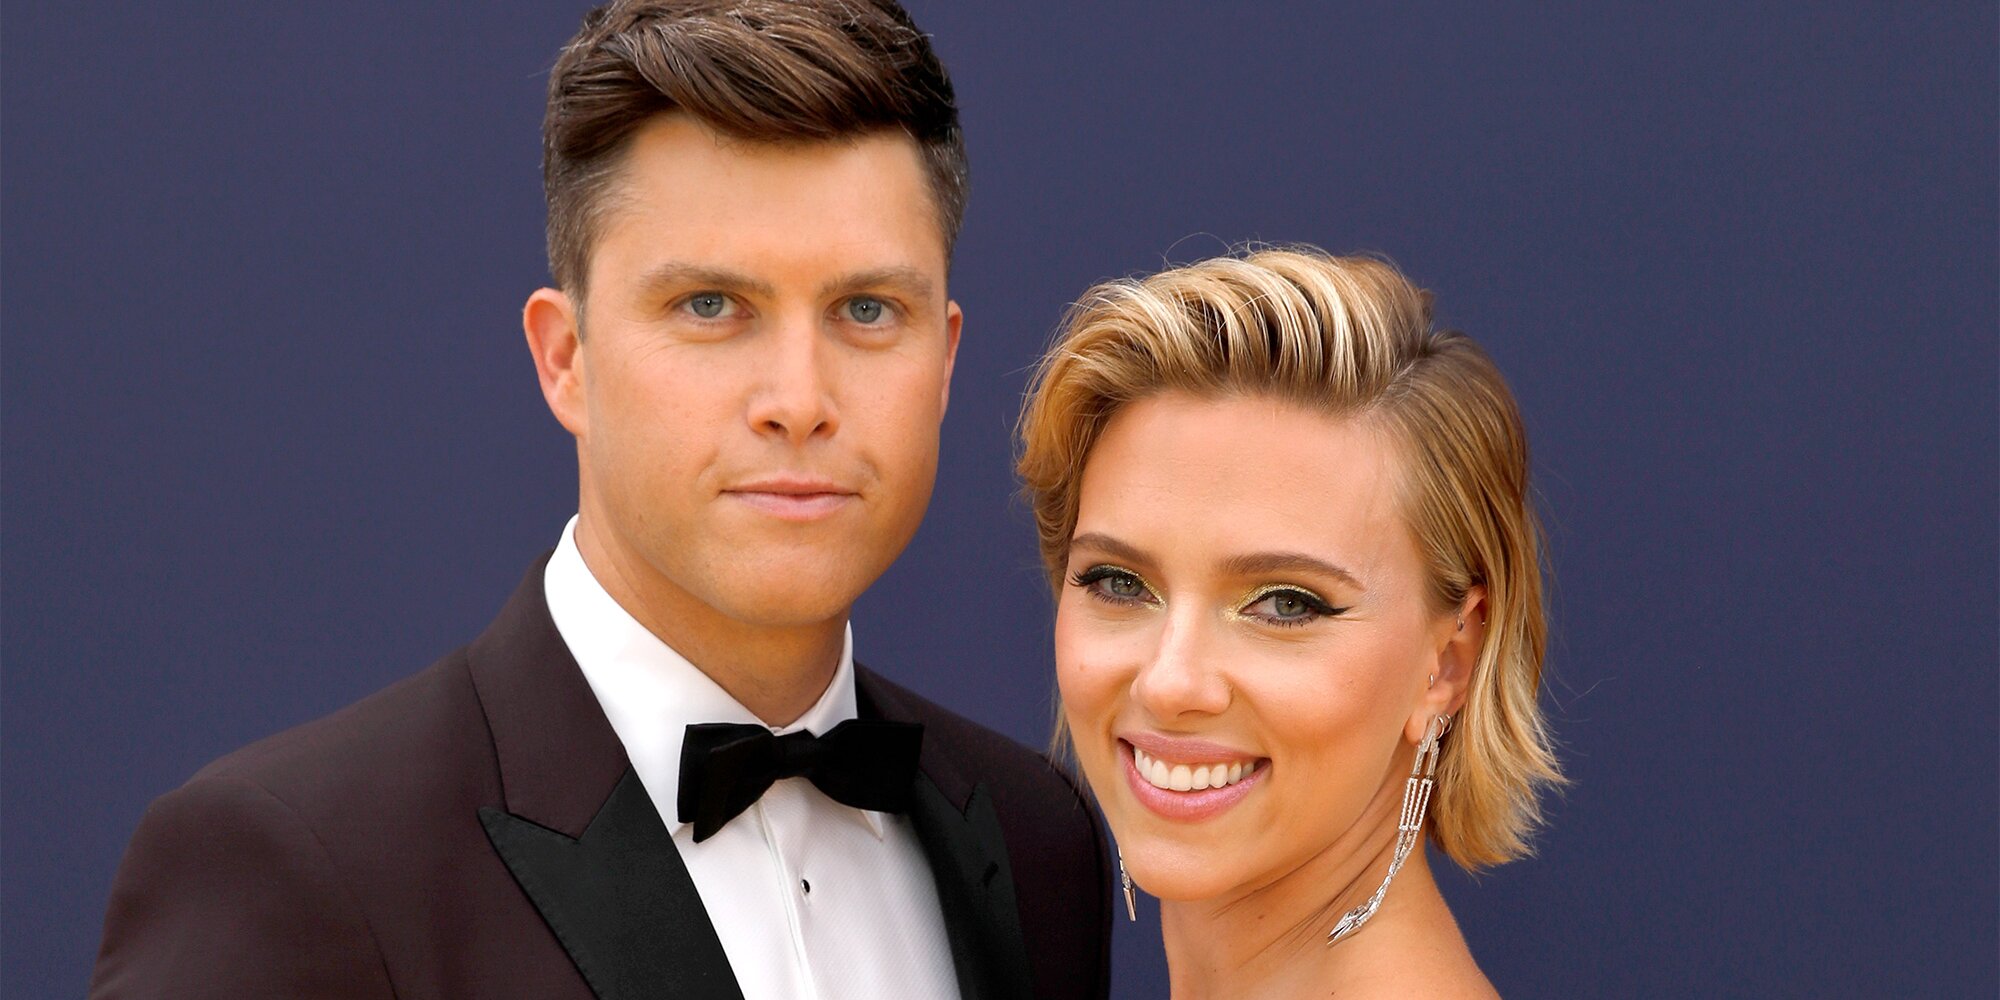 Scarlett Johansson says Colin Jost required spoiler alerts while reading Black Widow lines with her